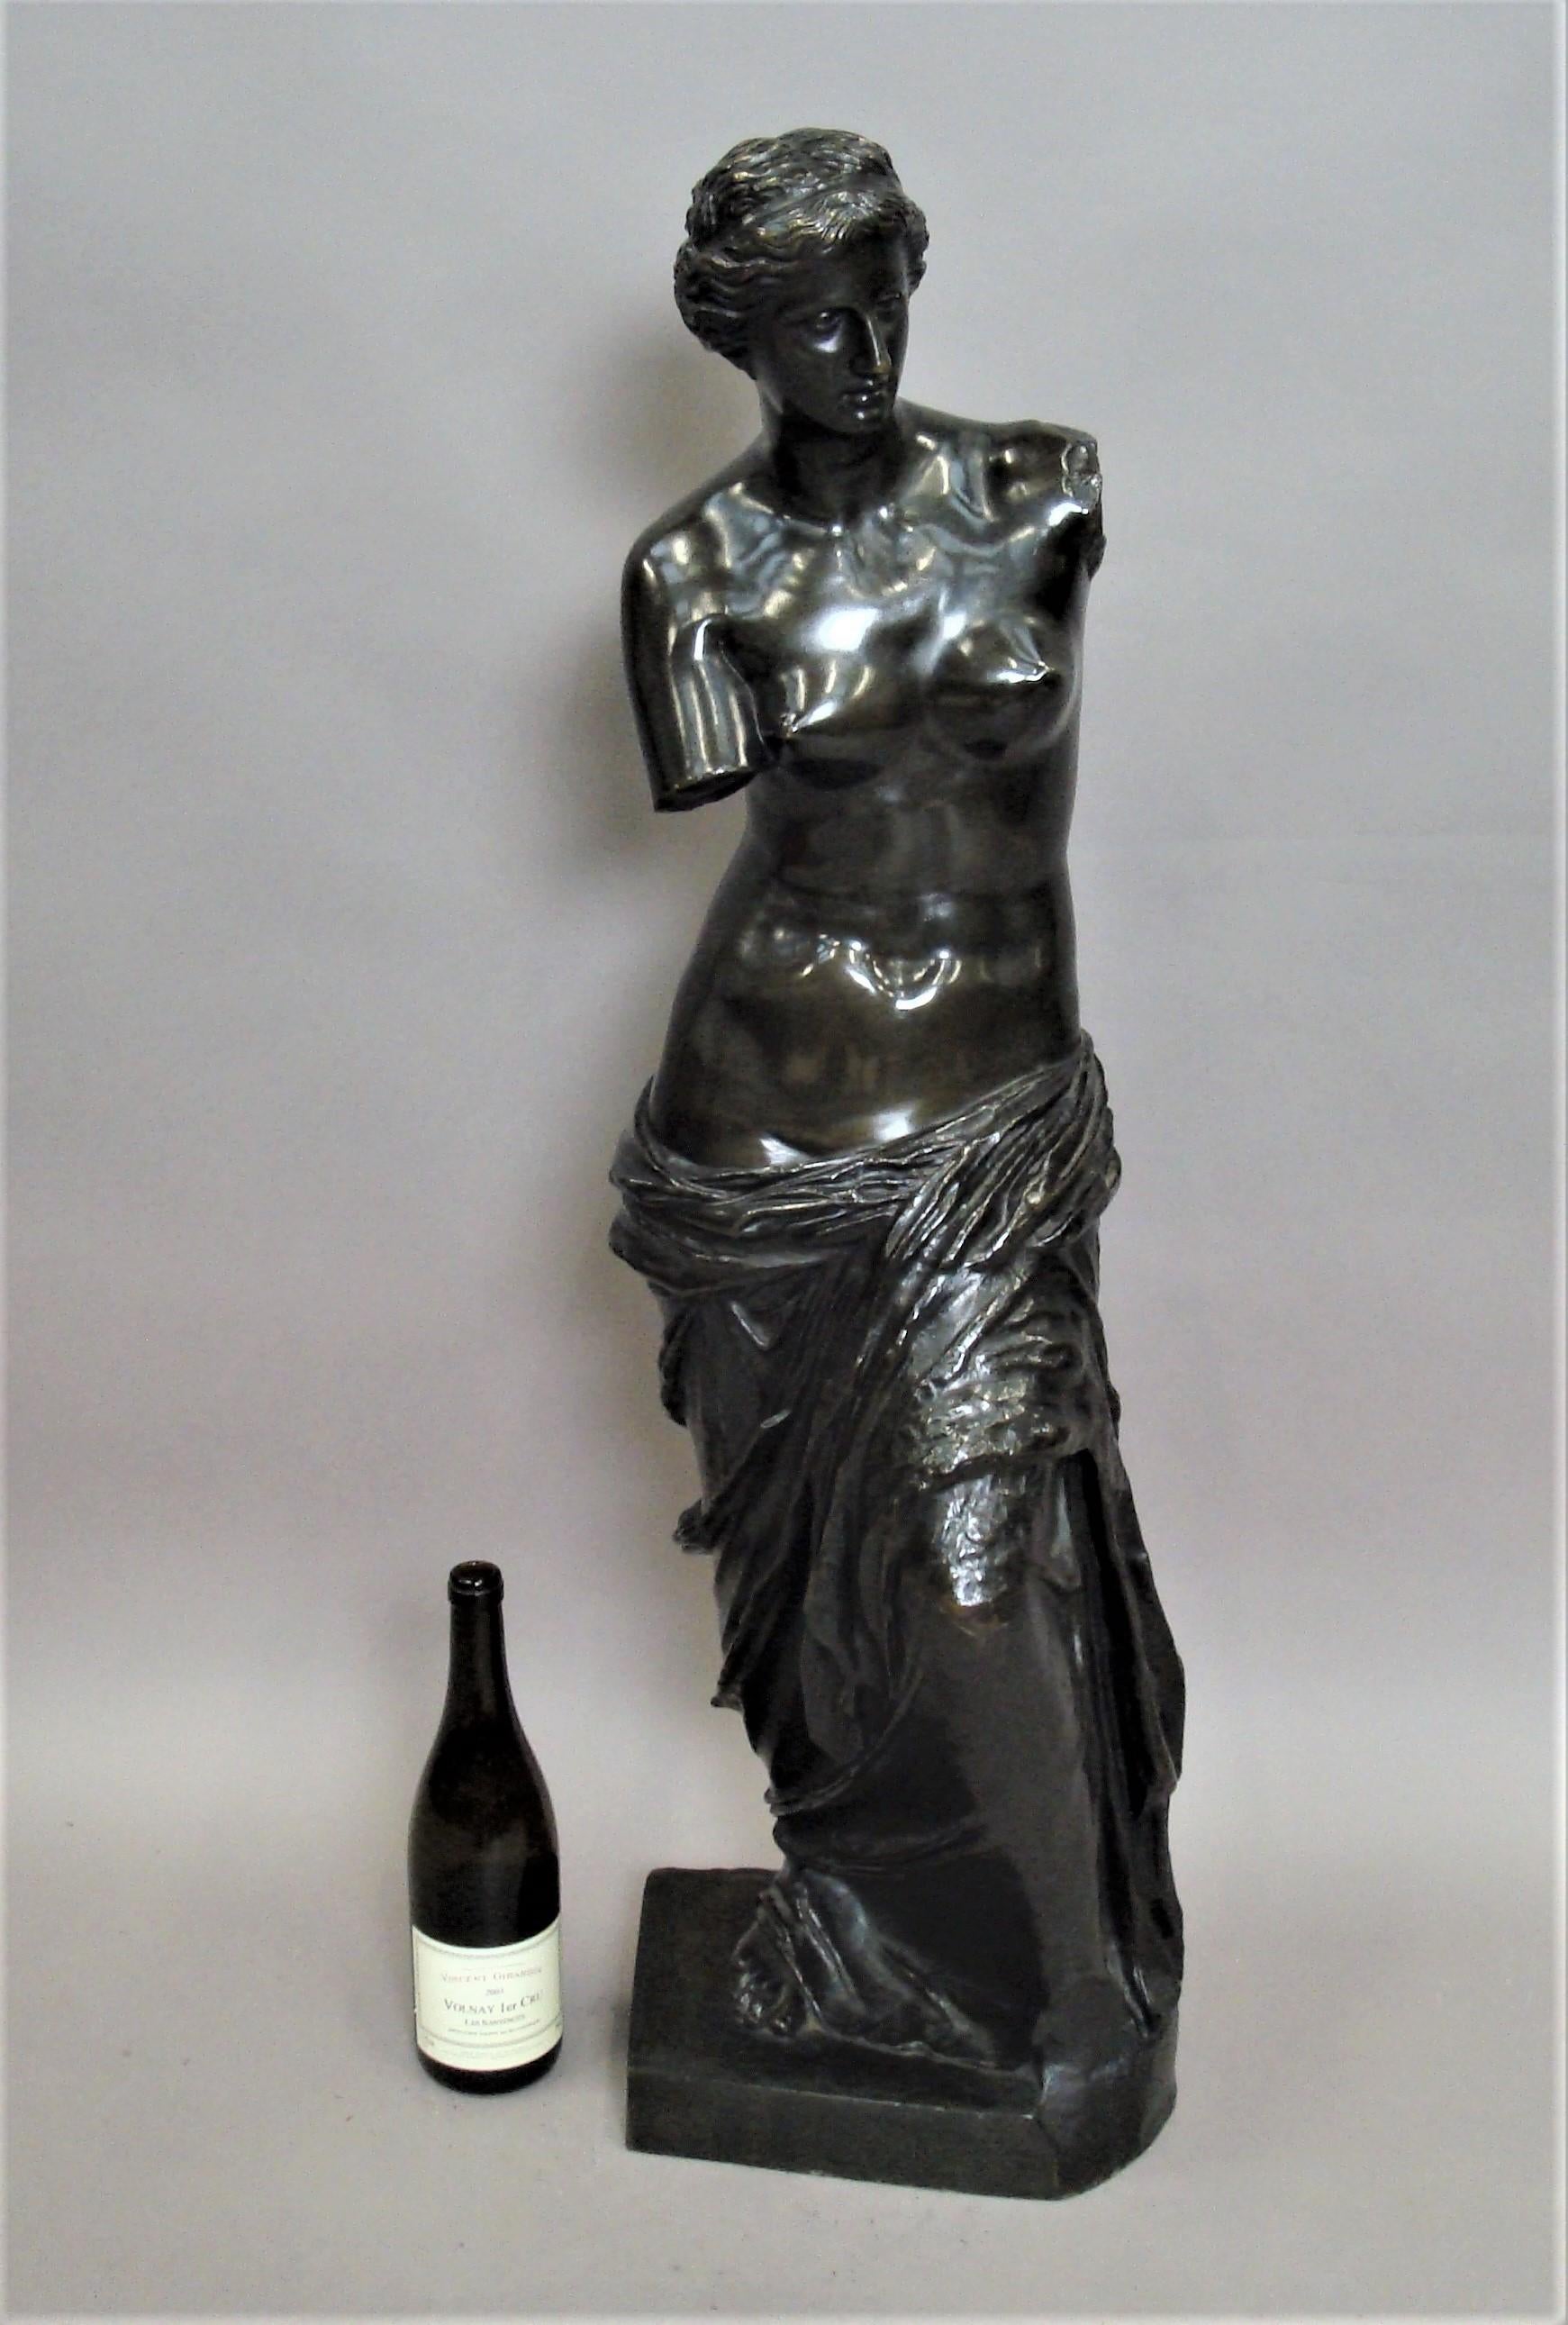 Impressive 19th century bronze grand tour sculpture of Venus de Milo, of very large scale, this well cast, classical figure with a good rich patina emphasizing her shape and curves.

Venus de Milo, is an ancient Greek statue and one of the most